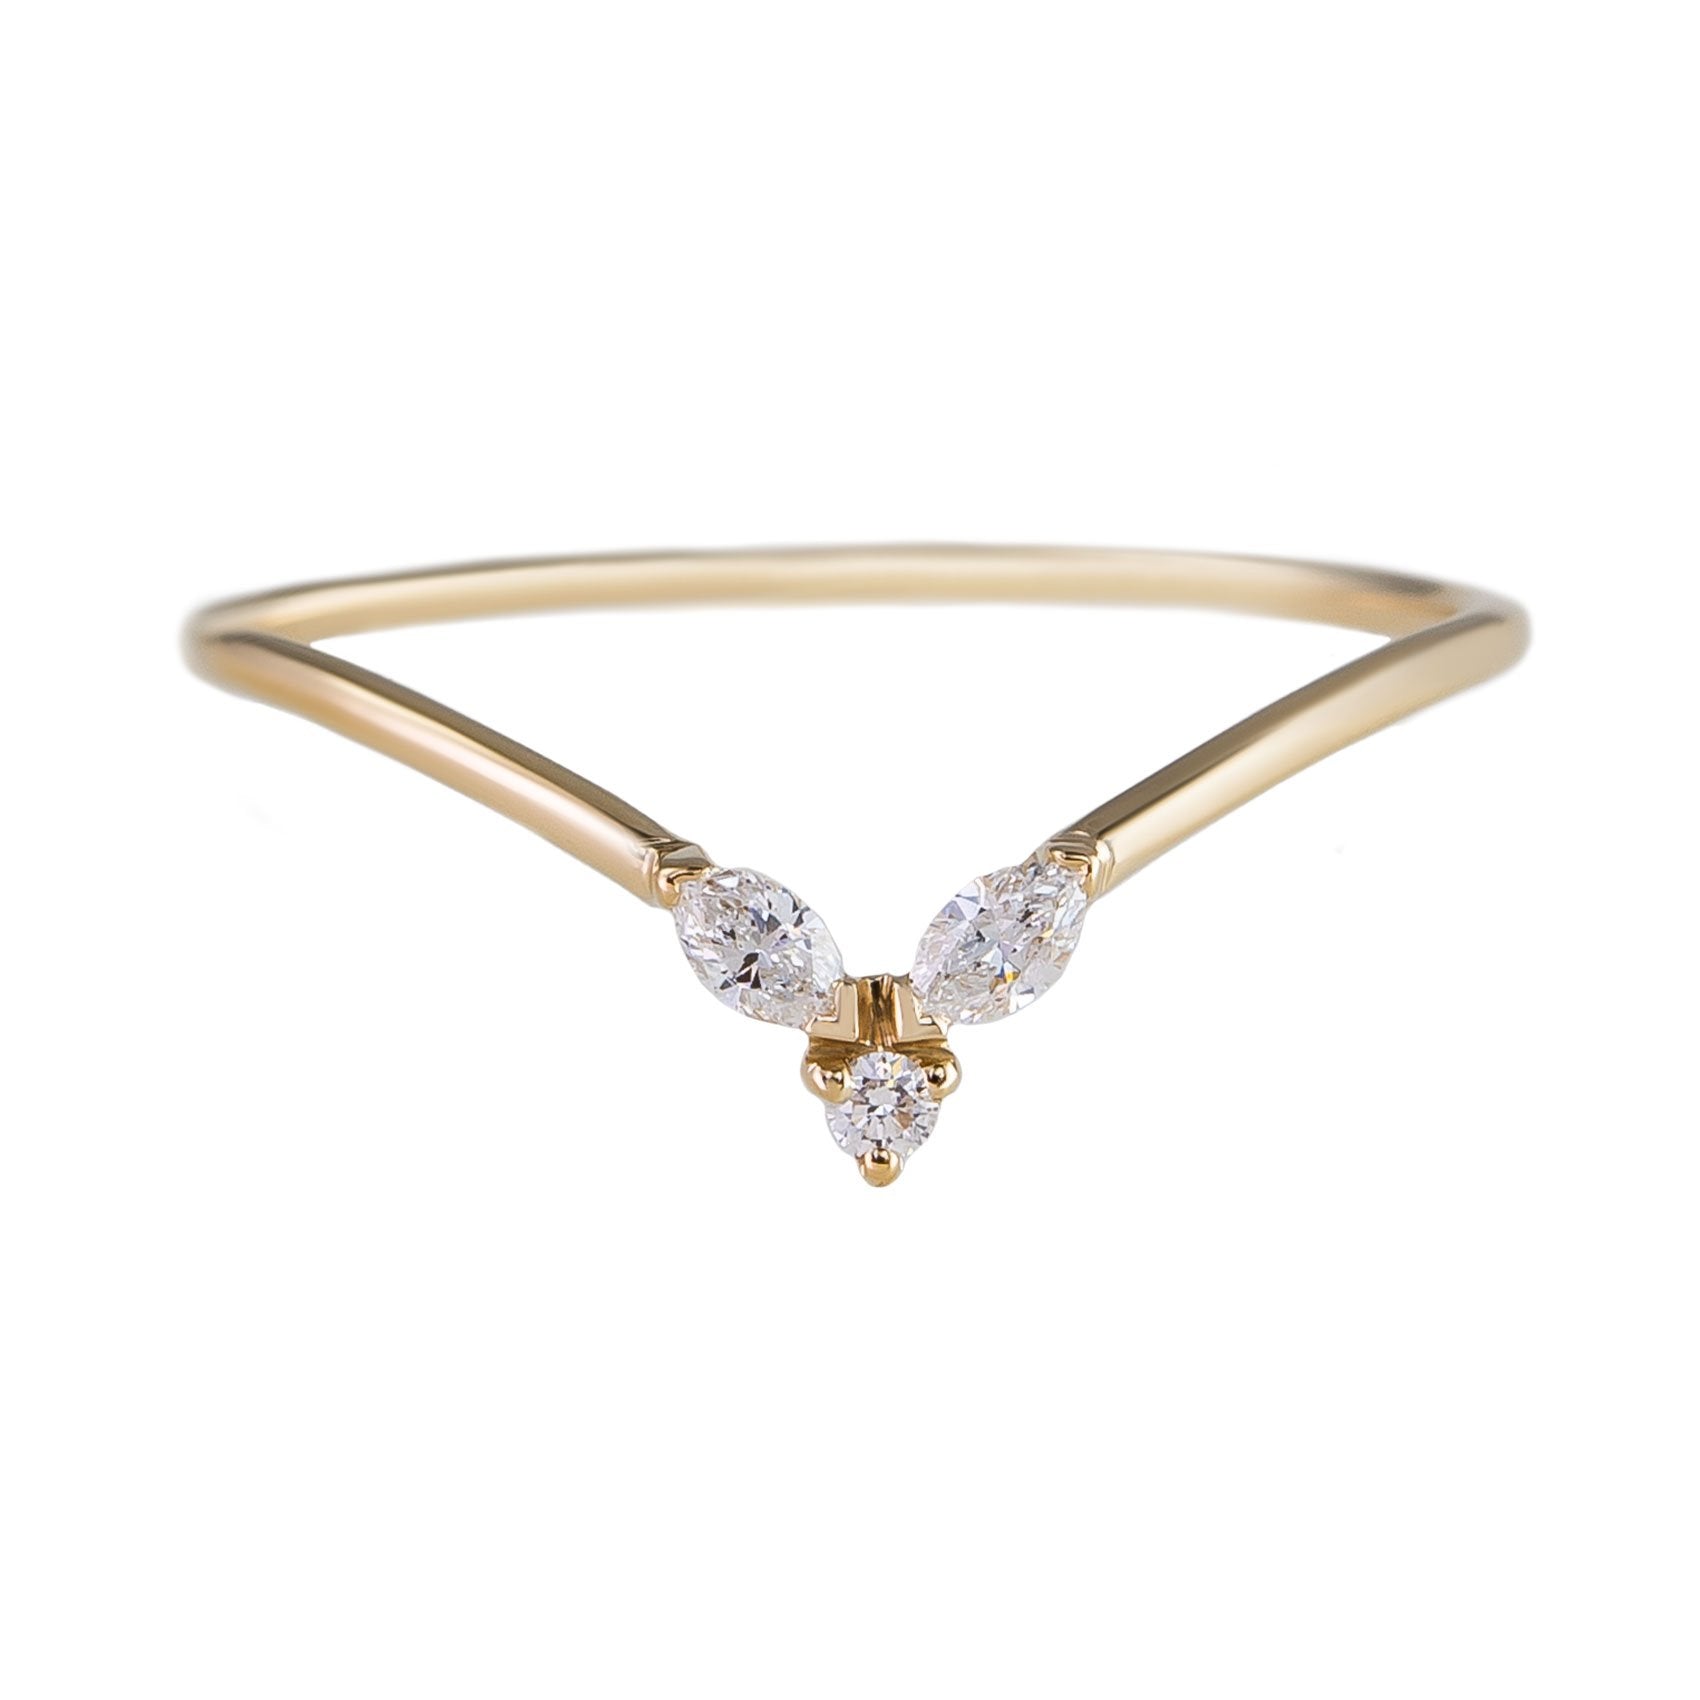 Metier by tomfoolery Marquise Halo Stacking Ring. 9ct Yellow Gold and White Diamond.